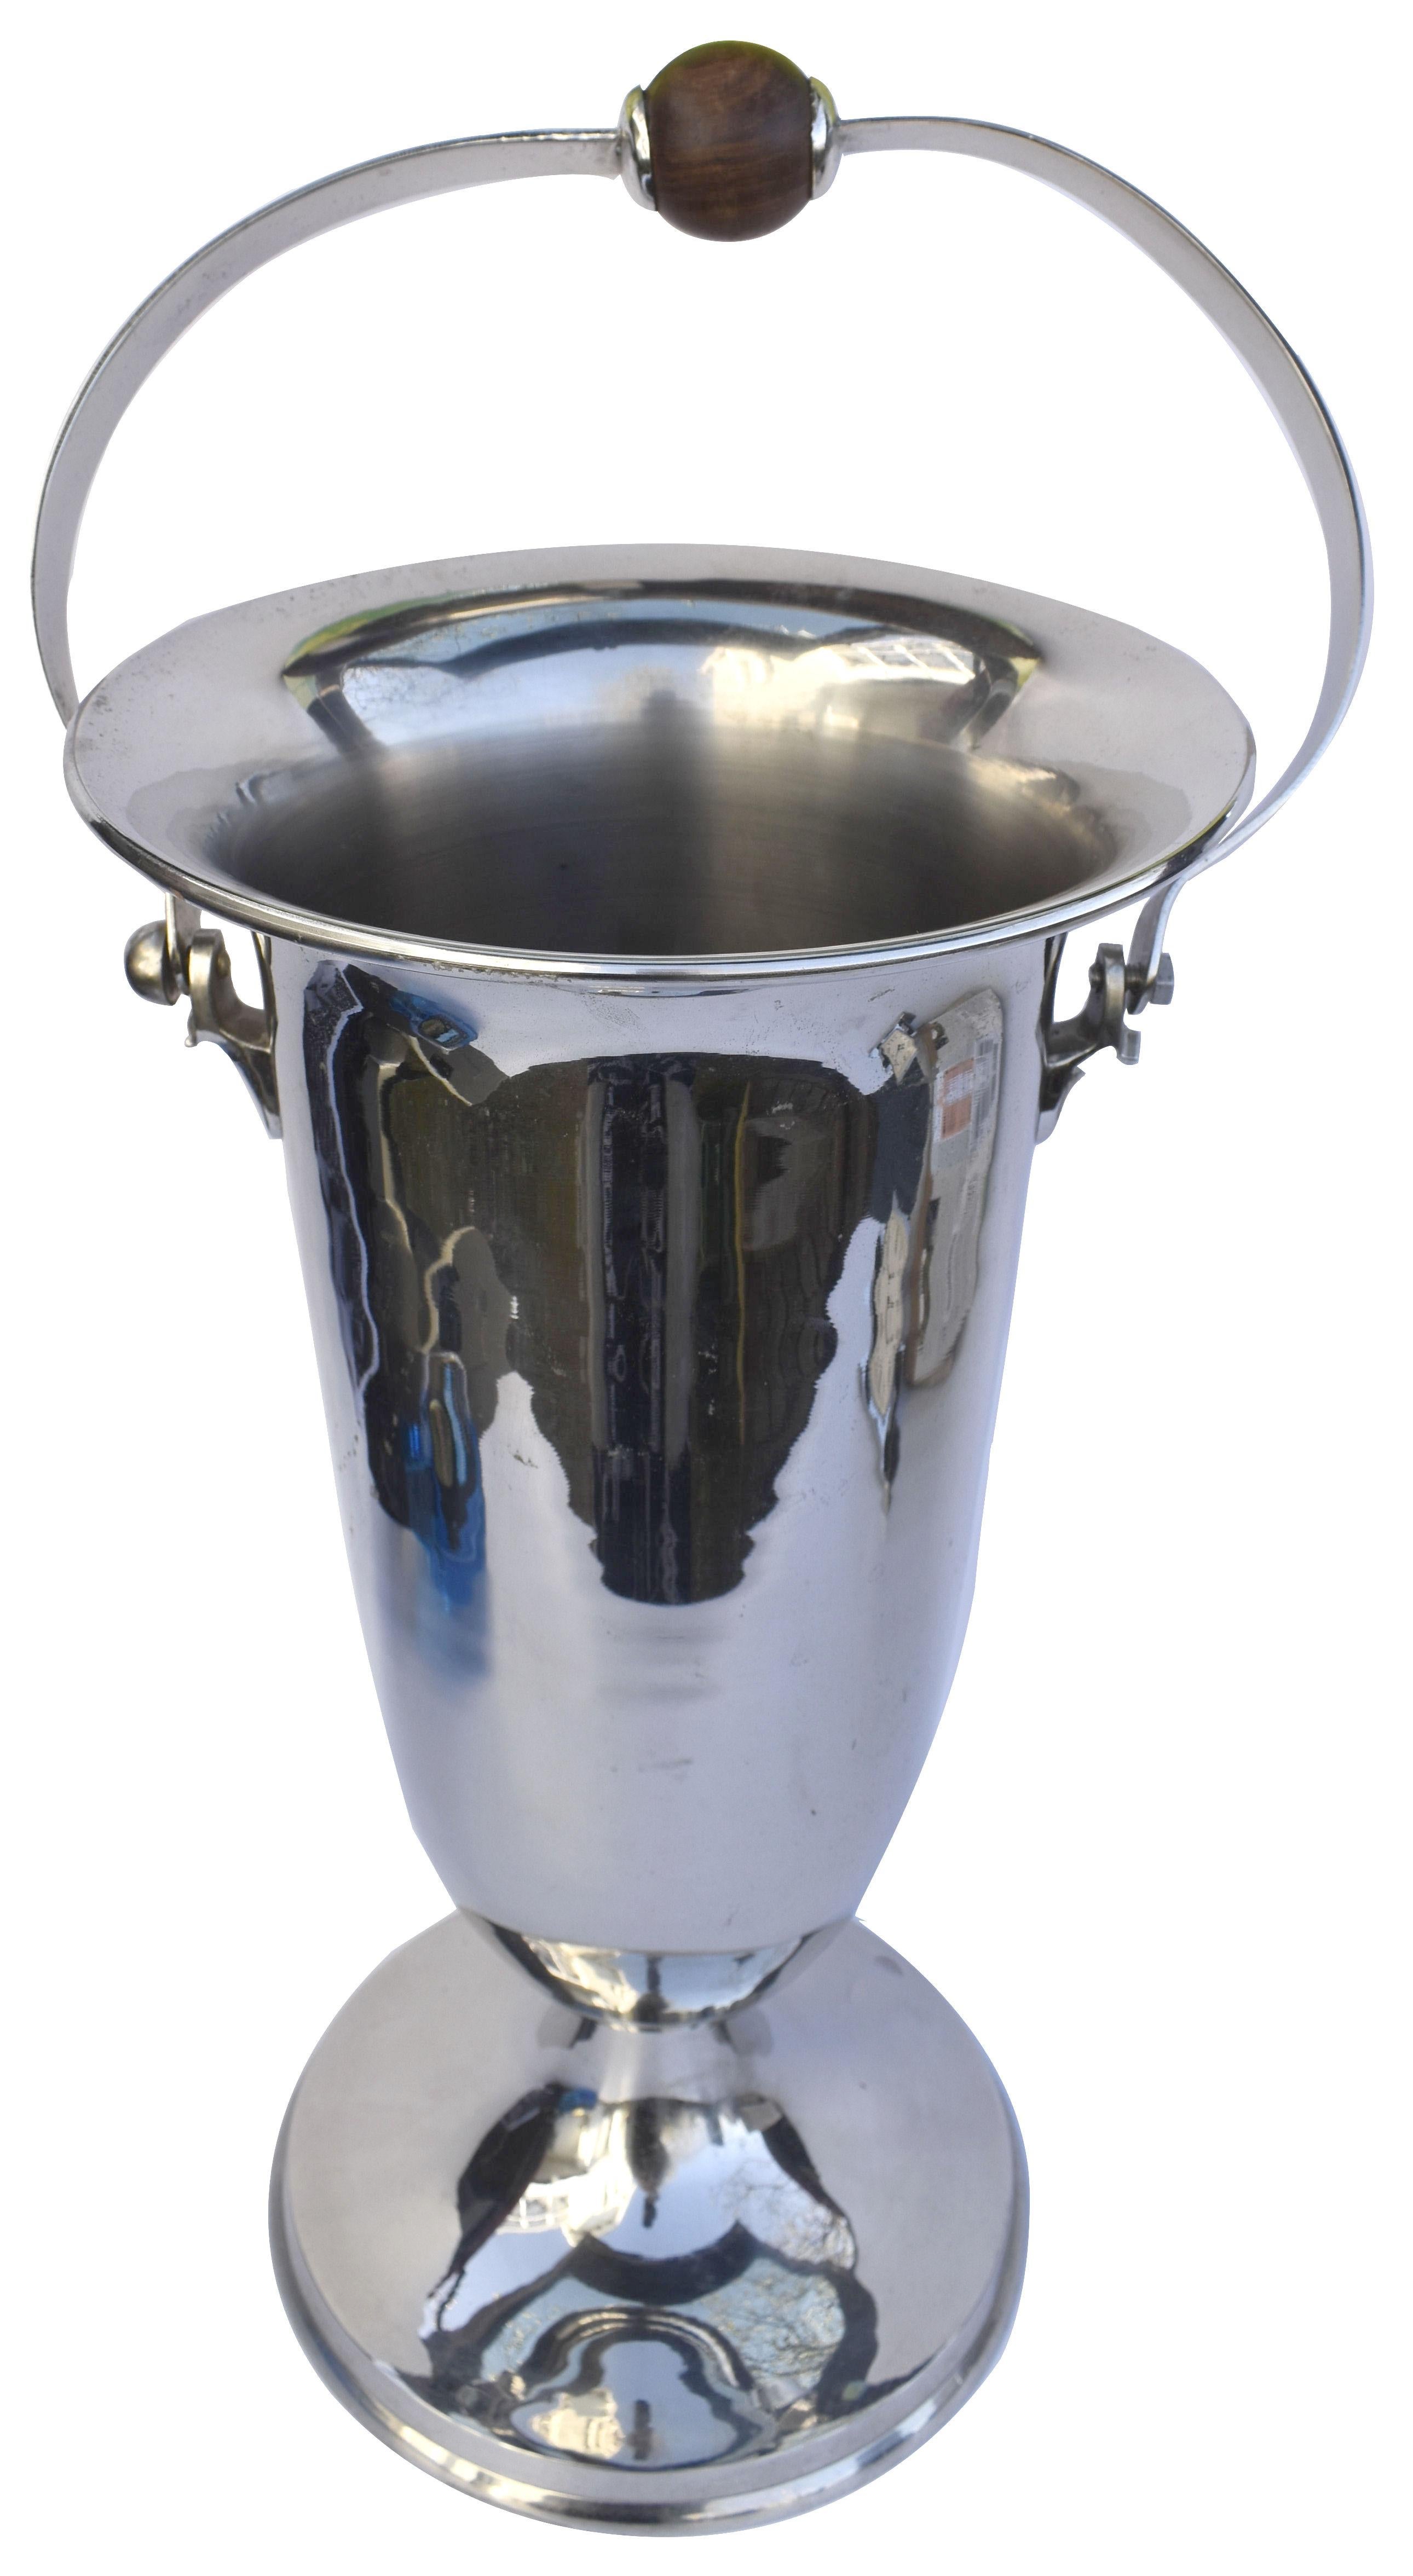 For entertaining in style we present to you this hugely stylish and huge in size Art Deco wine cooler/ ice bucket, dating to the 1930's and originating from France. Standing a whopping 41 cm high and with handle 55.5cm this over sized cooler is